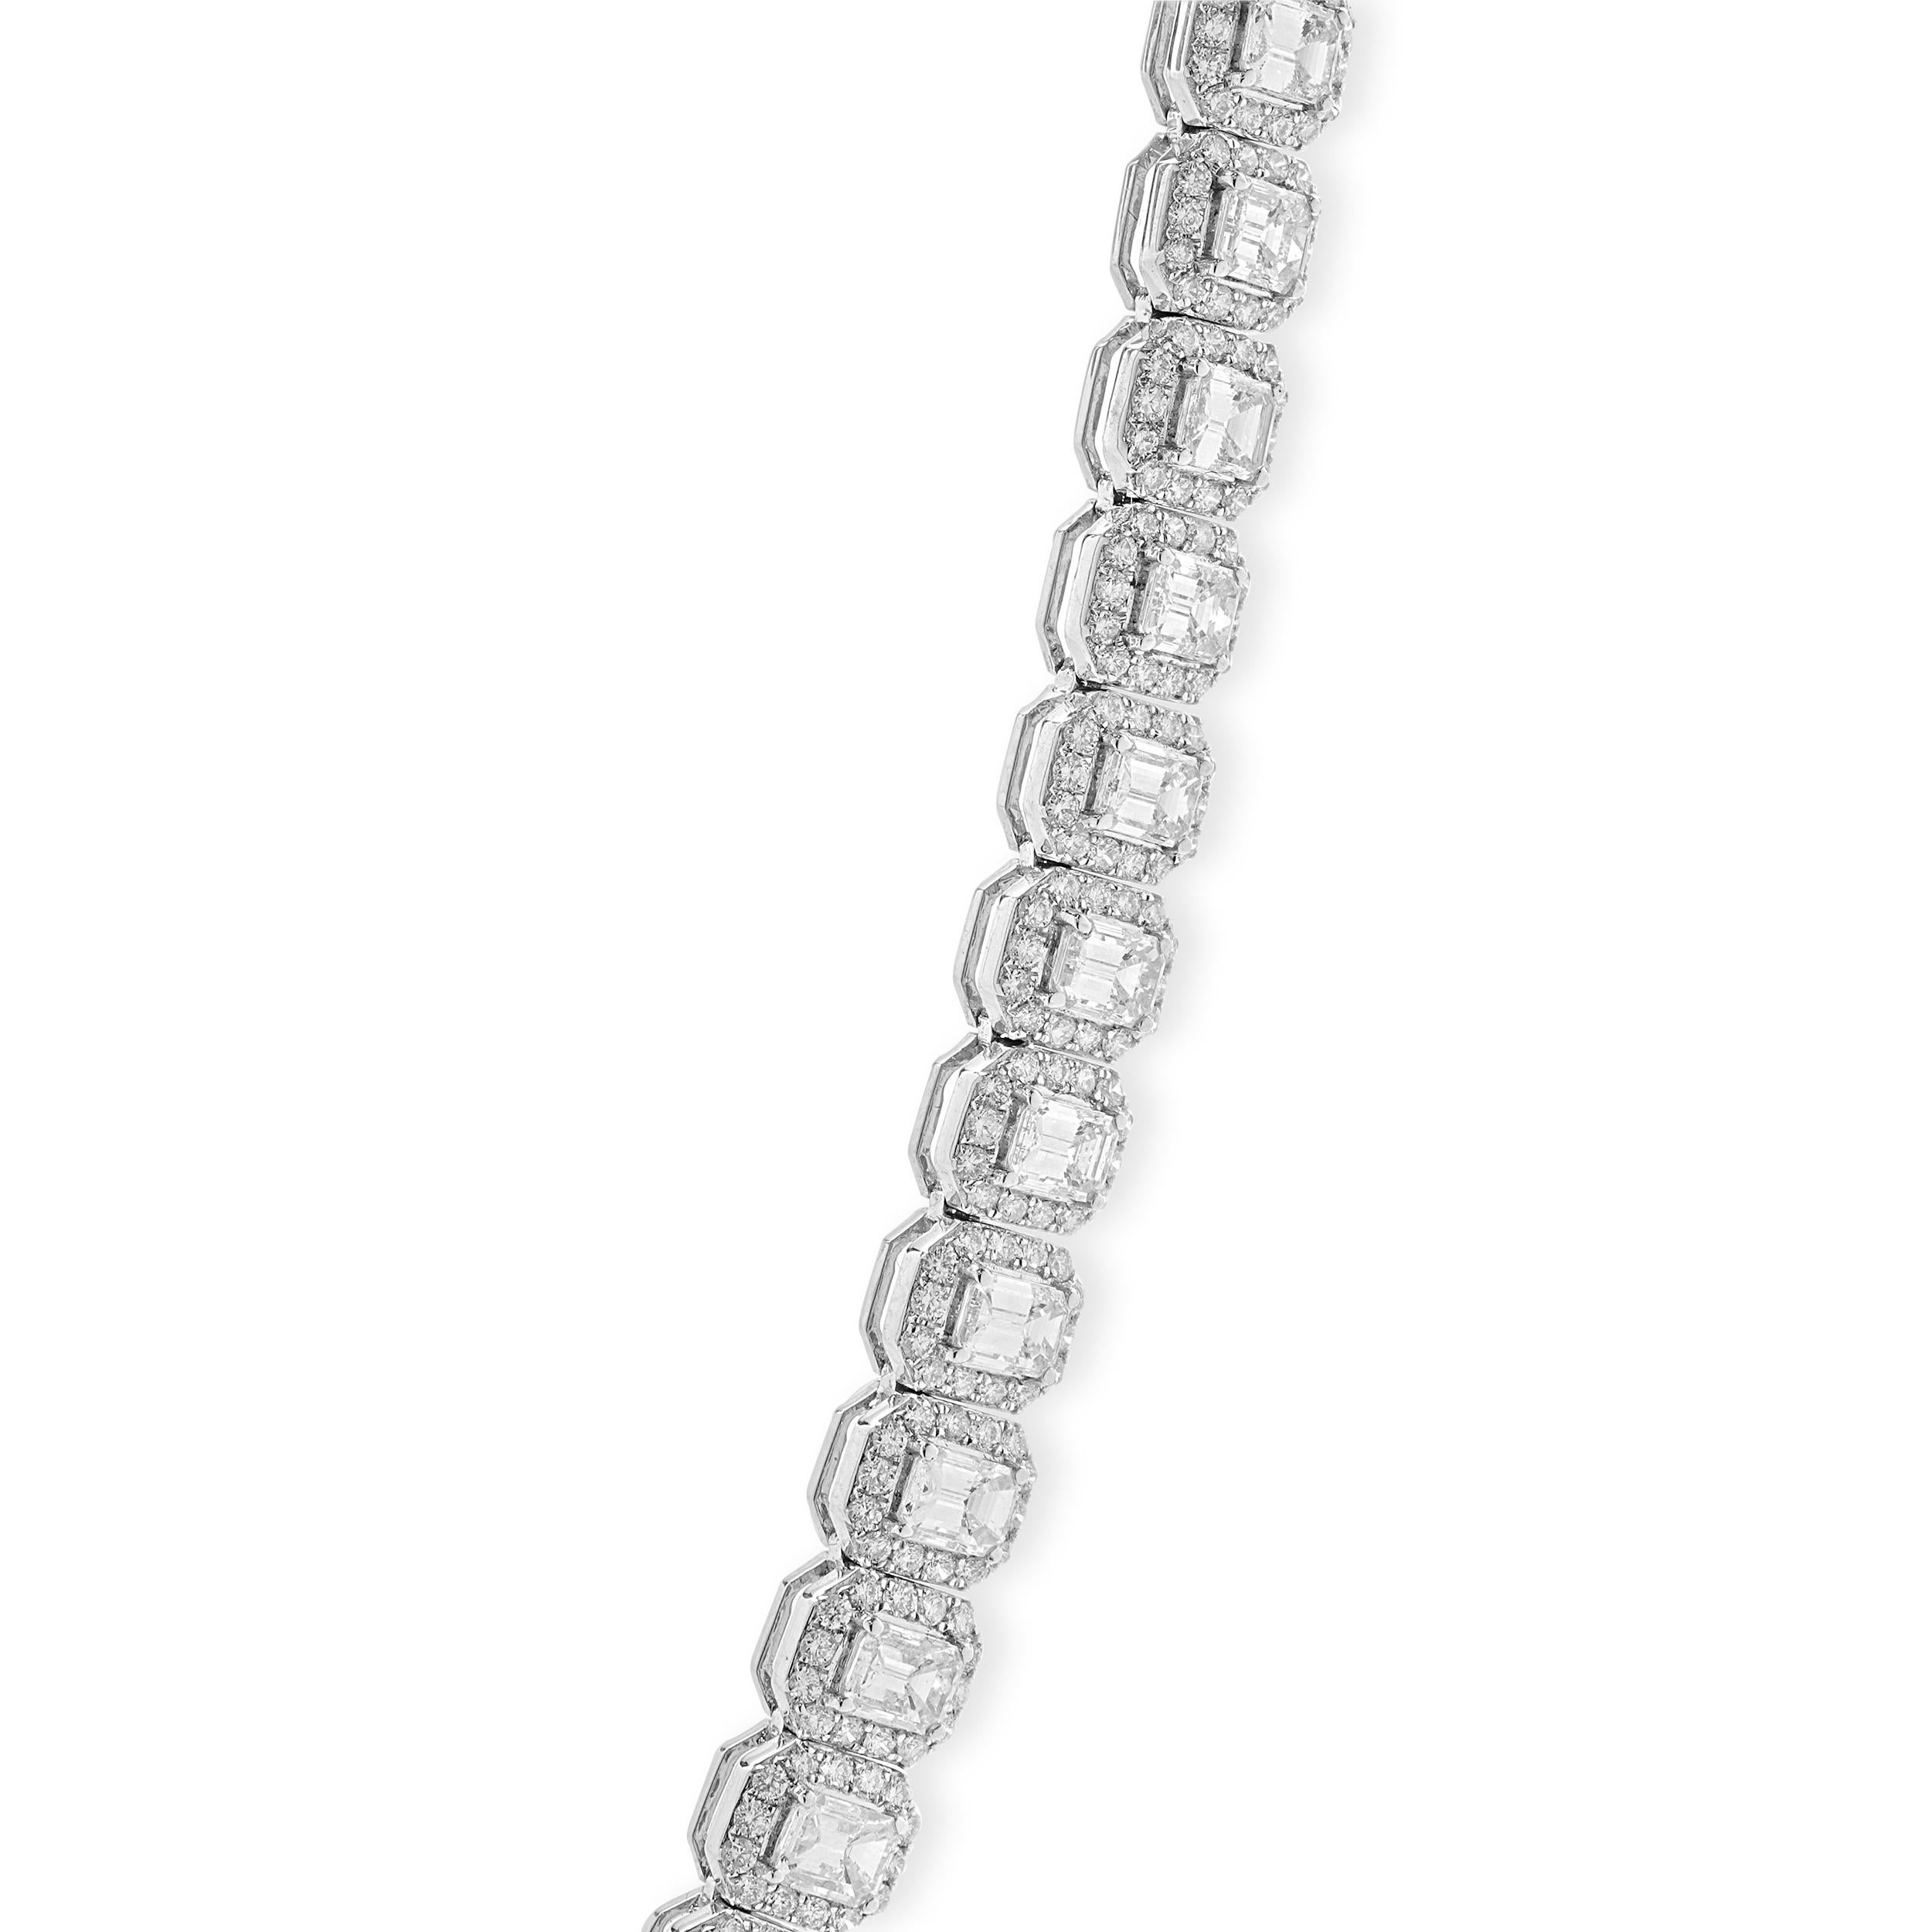 Designer: custom
Material: 14K white gold
Diamonds: 76 Emerald Cut Diamond = 20.03cttw
Diamonds: 1036 round brilliant= 6.06cttw
Color: G
Clarity:VS- SI1
Dimensions: necklace measures 16.5-inches in length 
Weight: 34.46 grams
